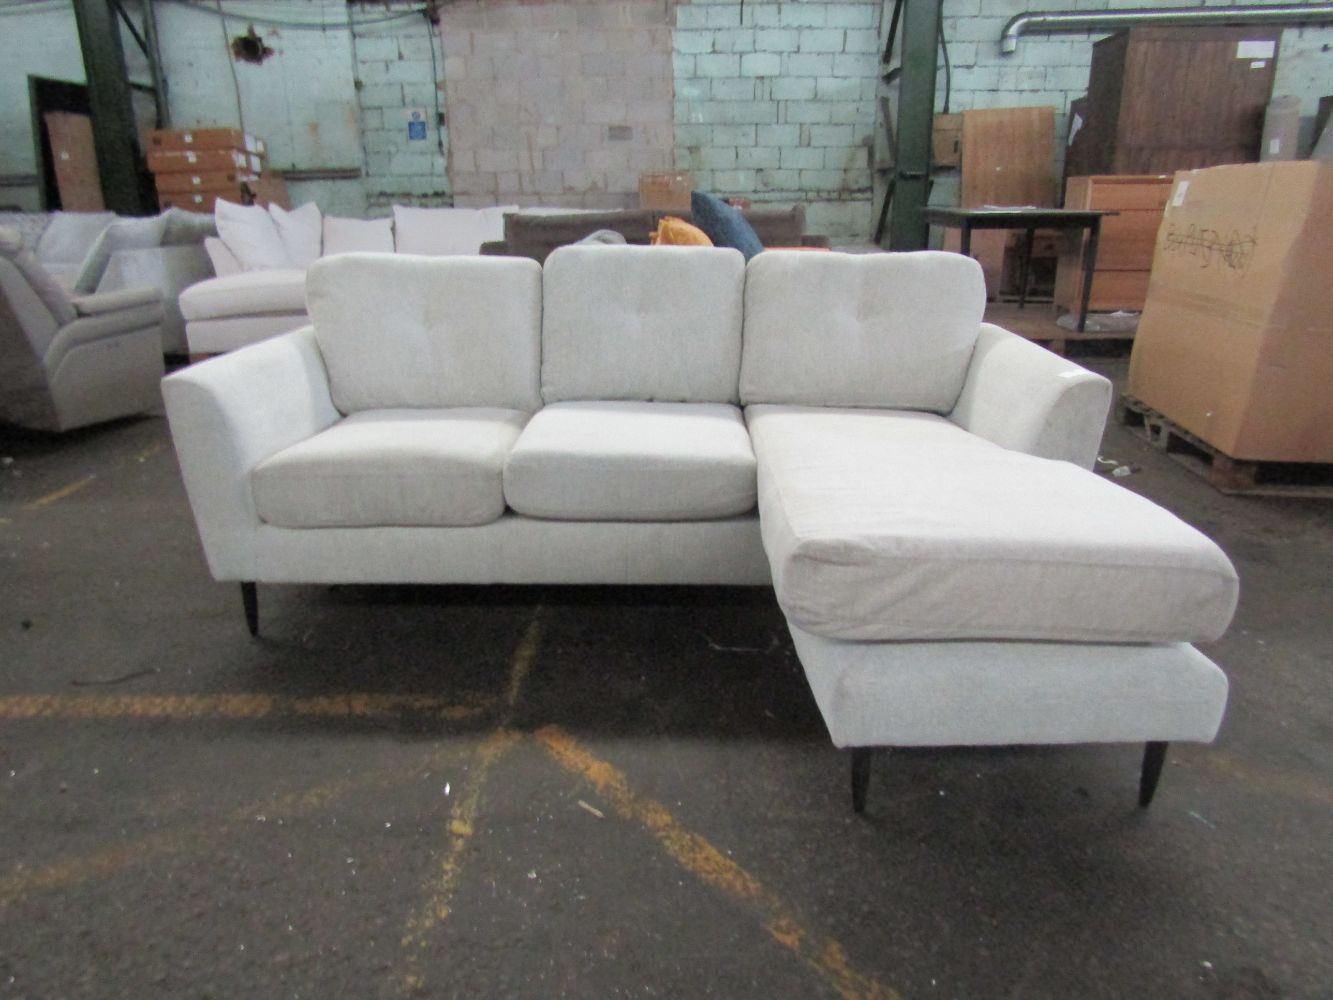 Sofas and chairs from SCS, Oak Funriture land, Heals and more